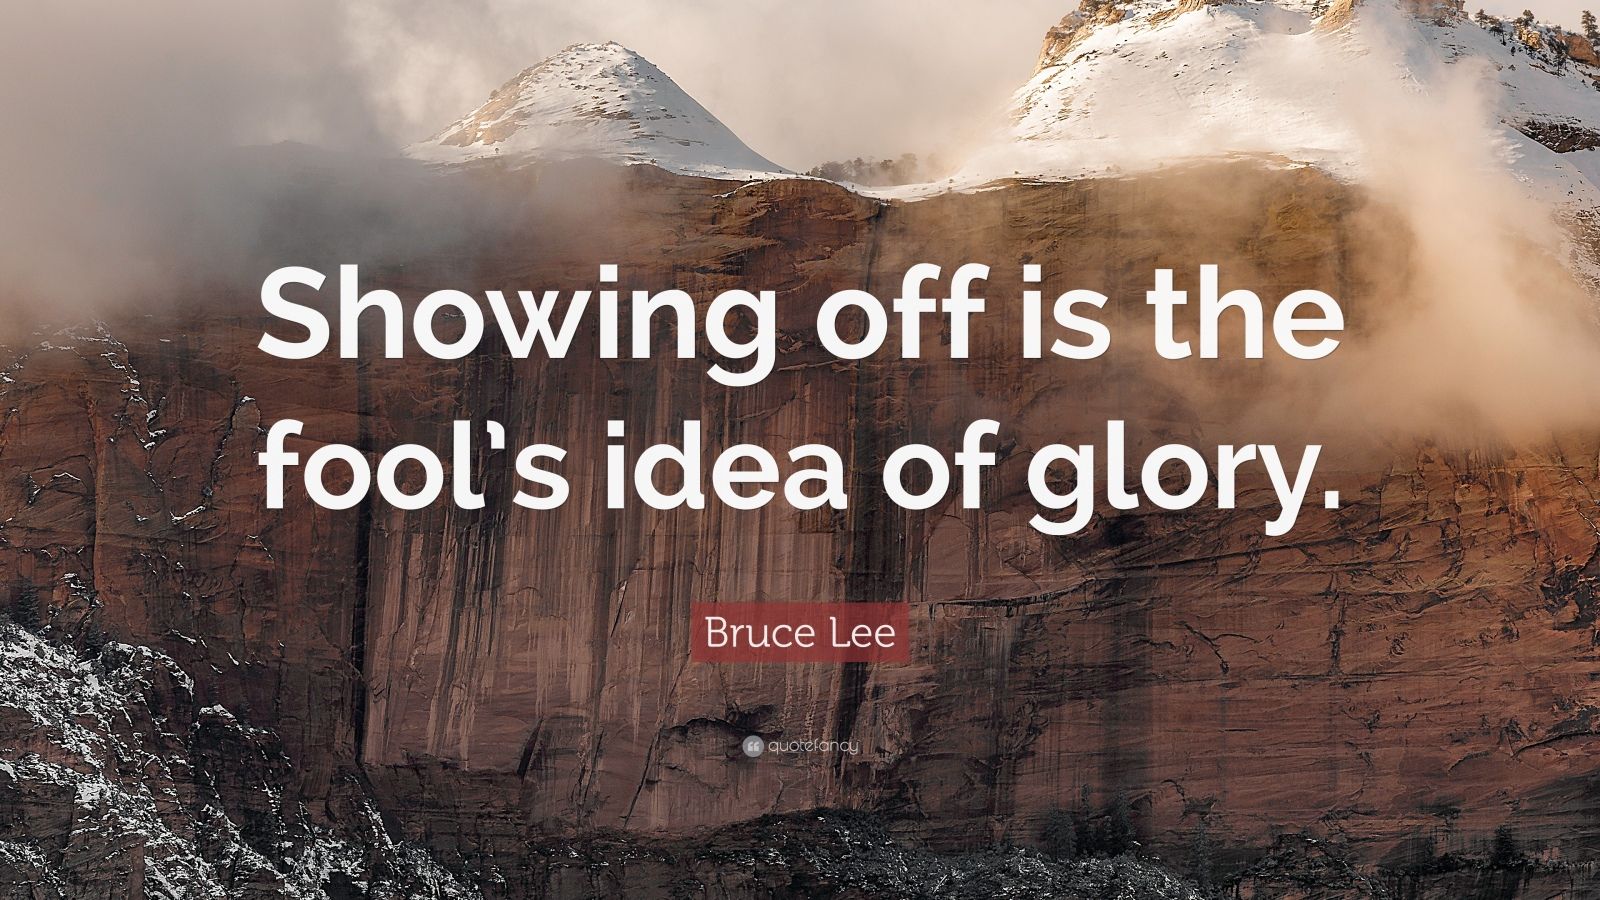 Bruce Lee Quote: “Showing off is the fool’s idea of glory.” (12